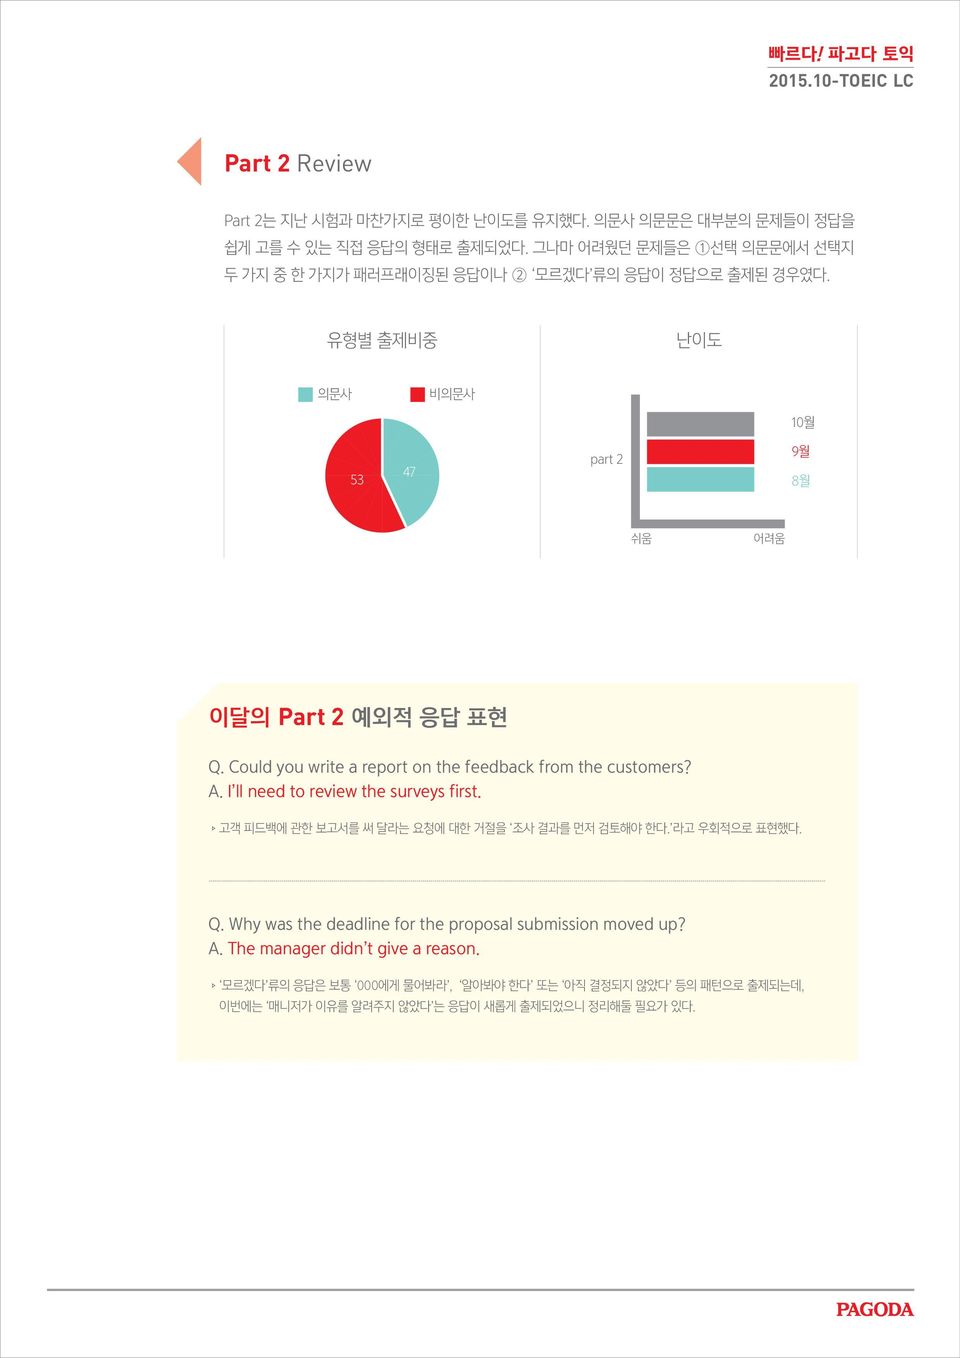 Could you write a report on the feedback from the customers? A. I ll need to review the surveys first. 고객 피드백에 관한 보고서를 써 달라는 요청에 대한 거절을 조사 결과를 먼저 검토해야 한다.